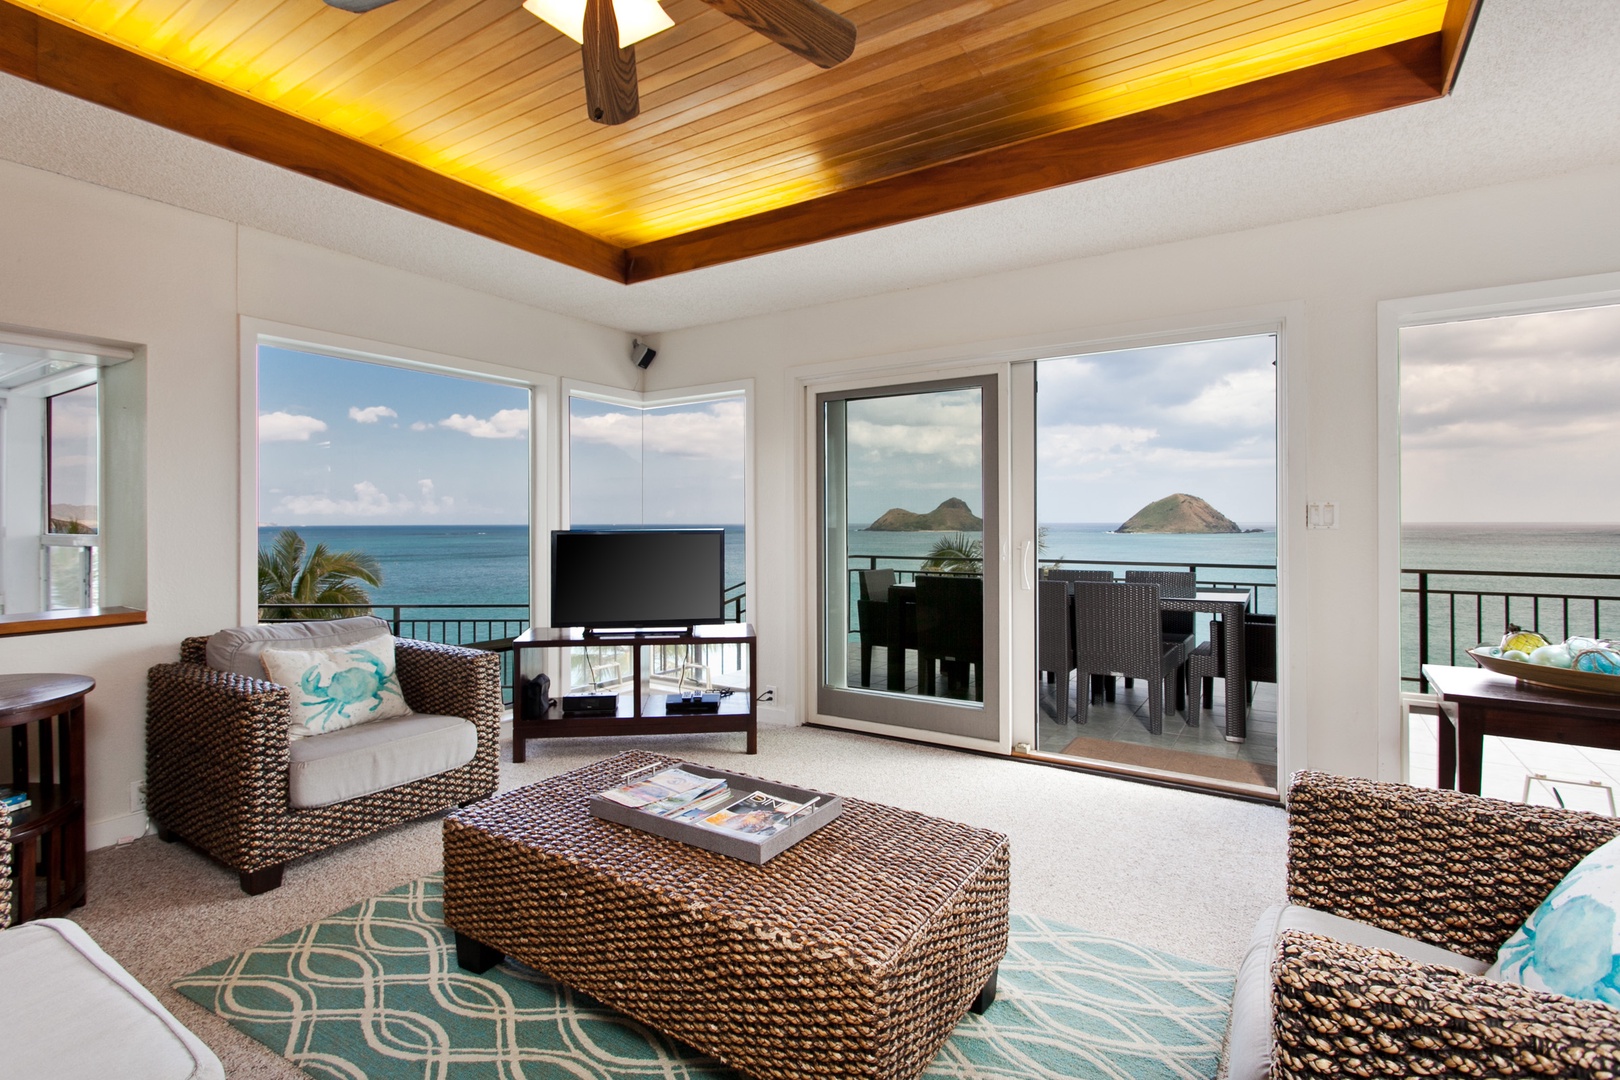 Kailua Vacation Rentals, Lanikai Village* - Hale Kolea: A villa featuring a private lanai and large windows with sweeping ocean views.